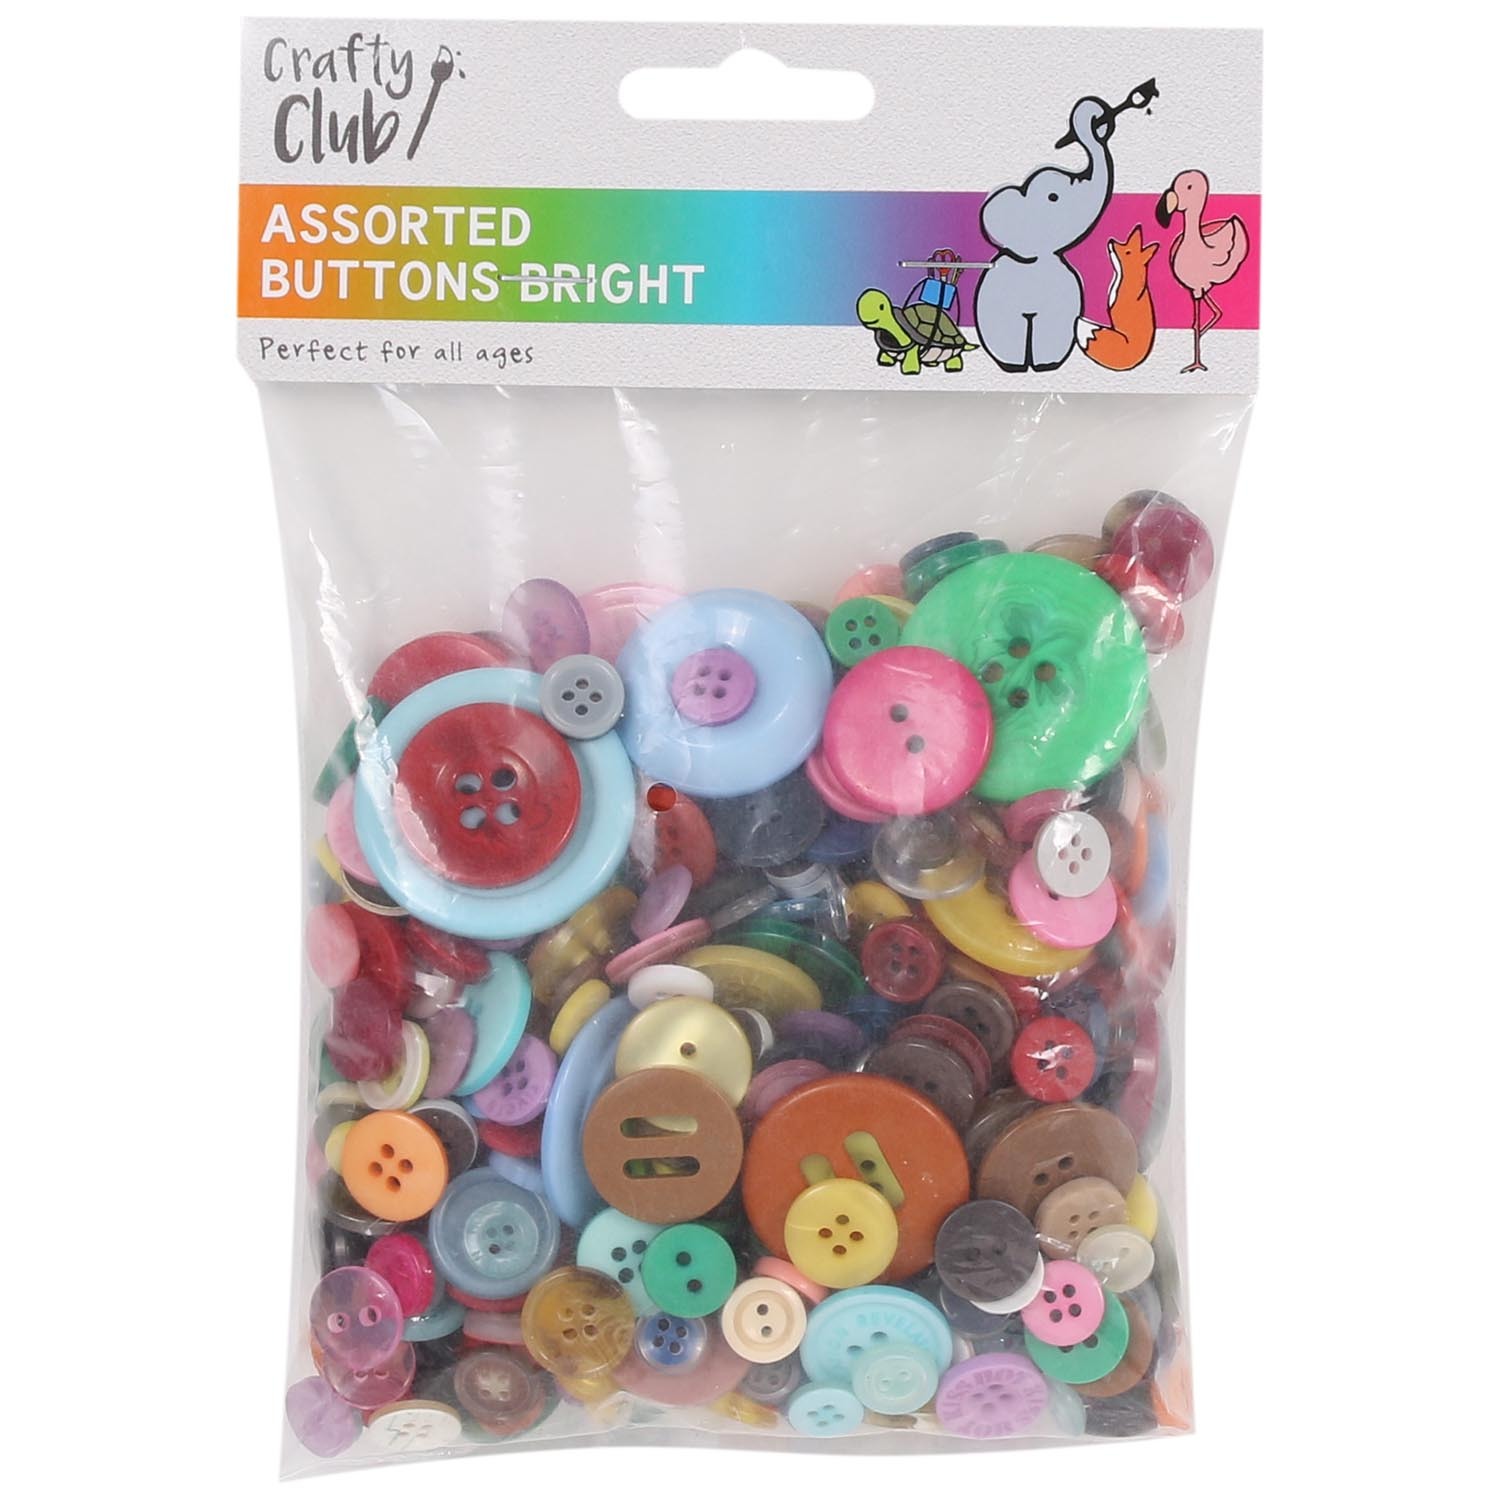 Crafty Club Assorted Buttons - Bright Image